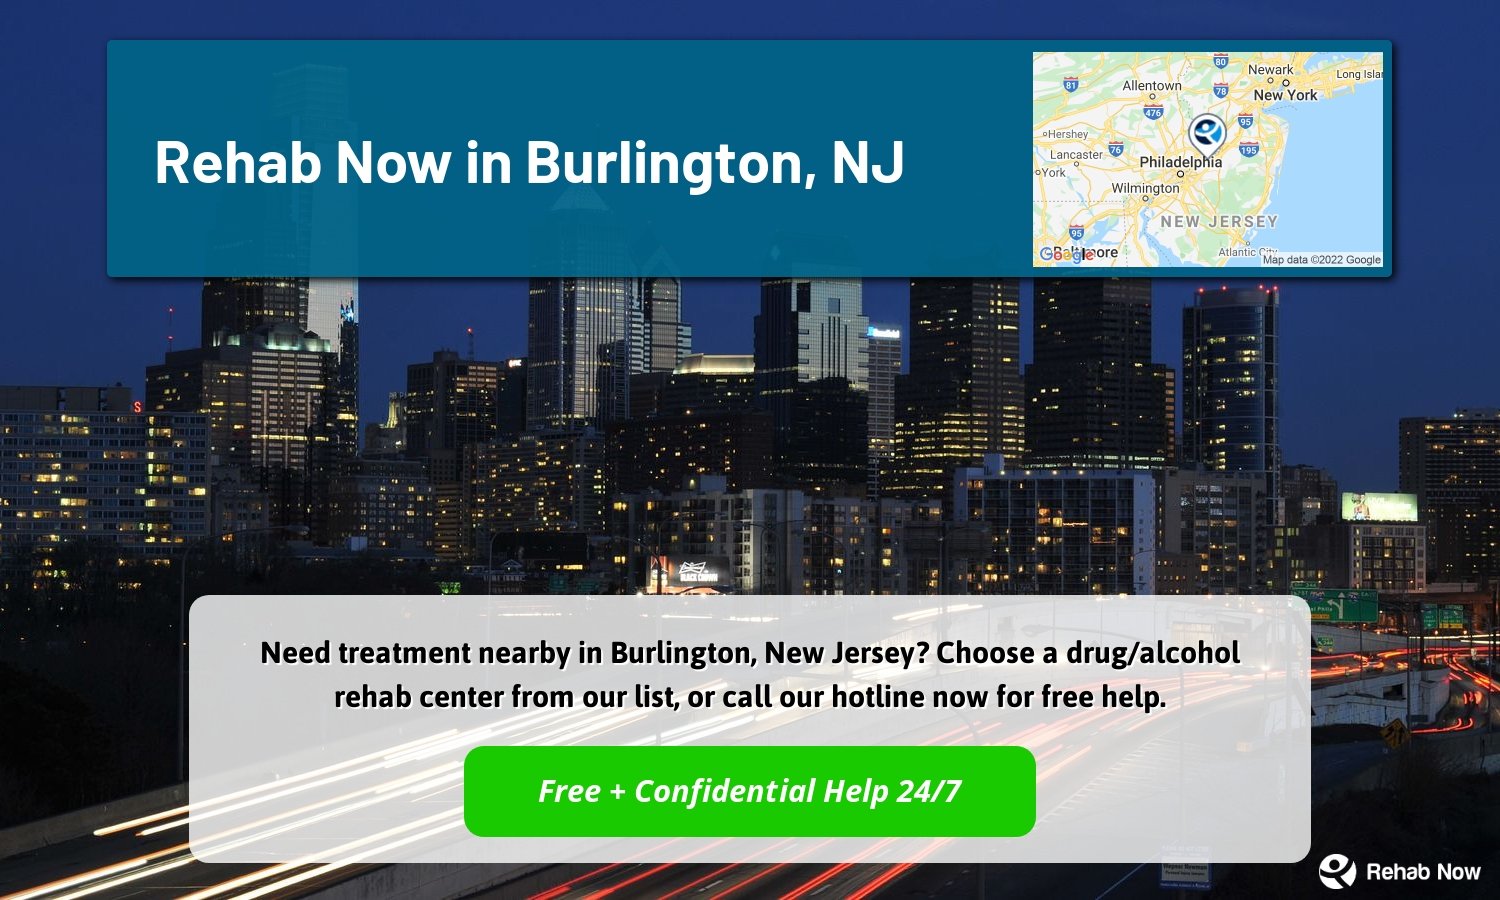 Need treatment nearby in Burlington, New Jersey? Choose a drug/alcohol rehab center from our list, or call our hotline now for free help.